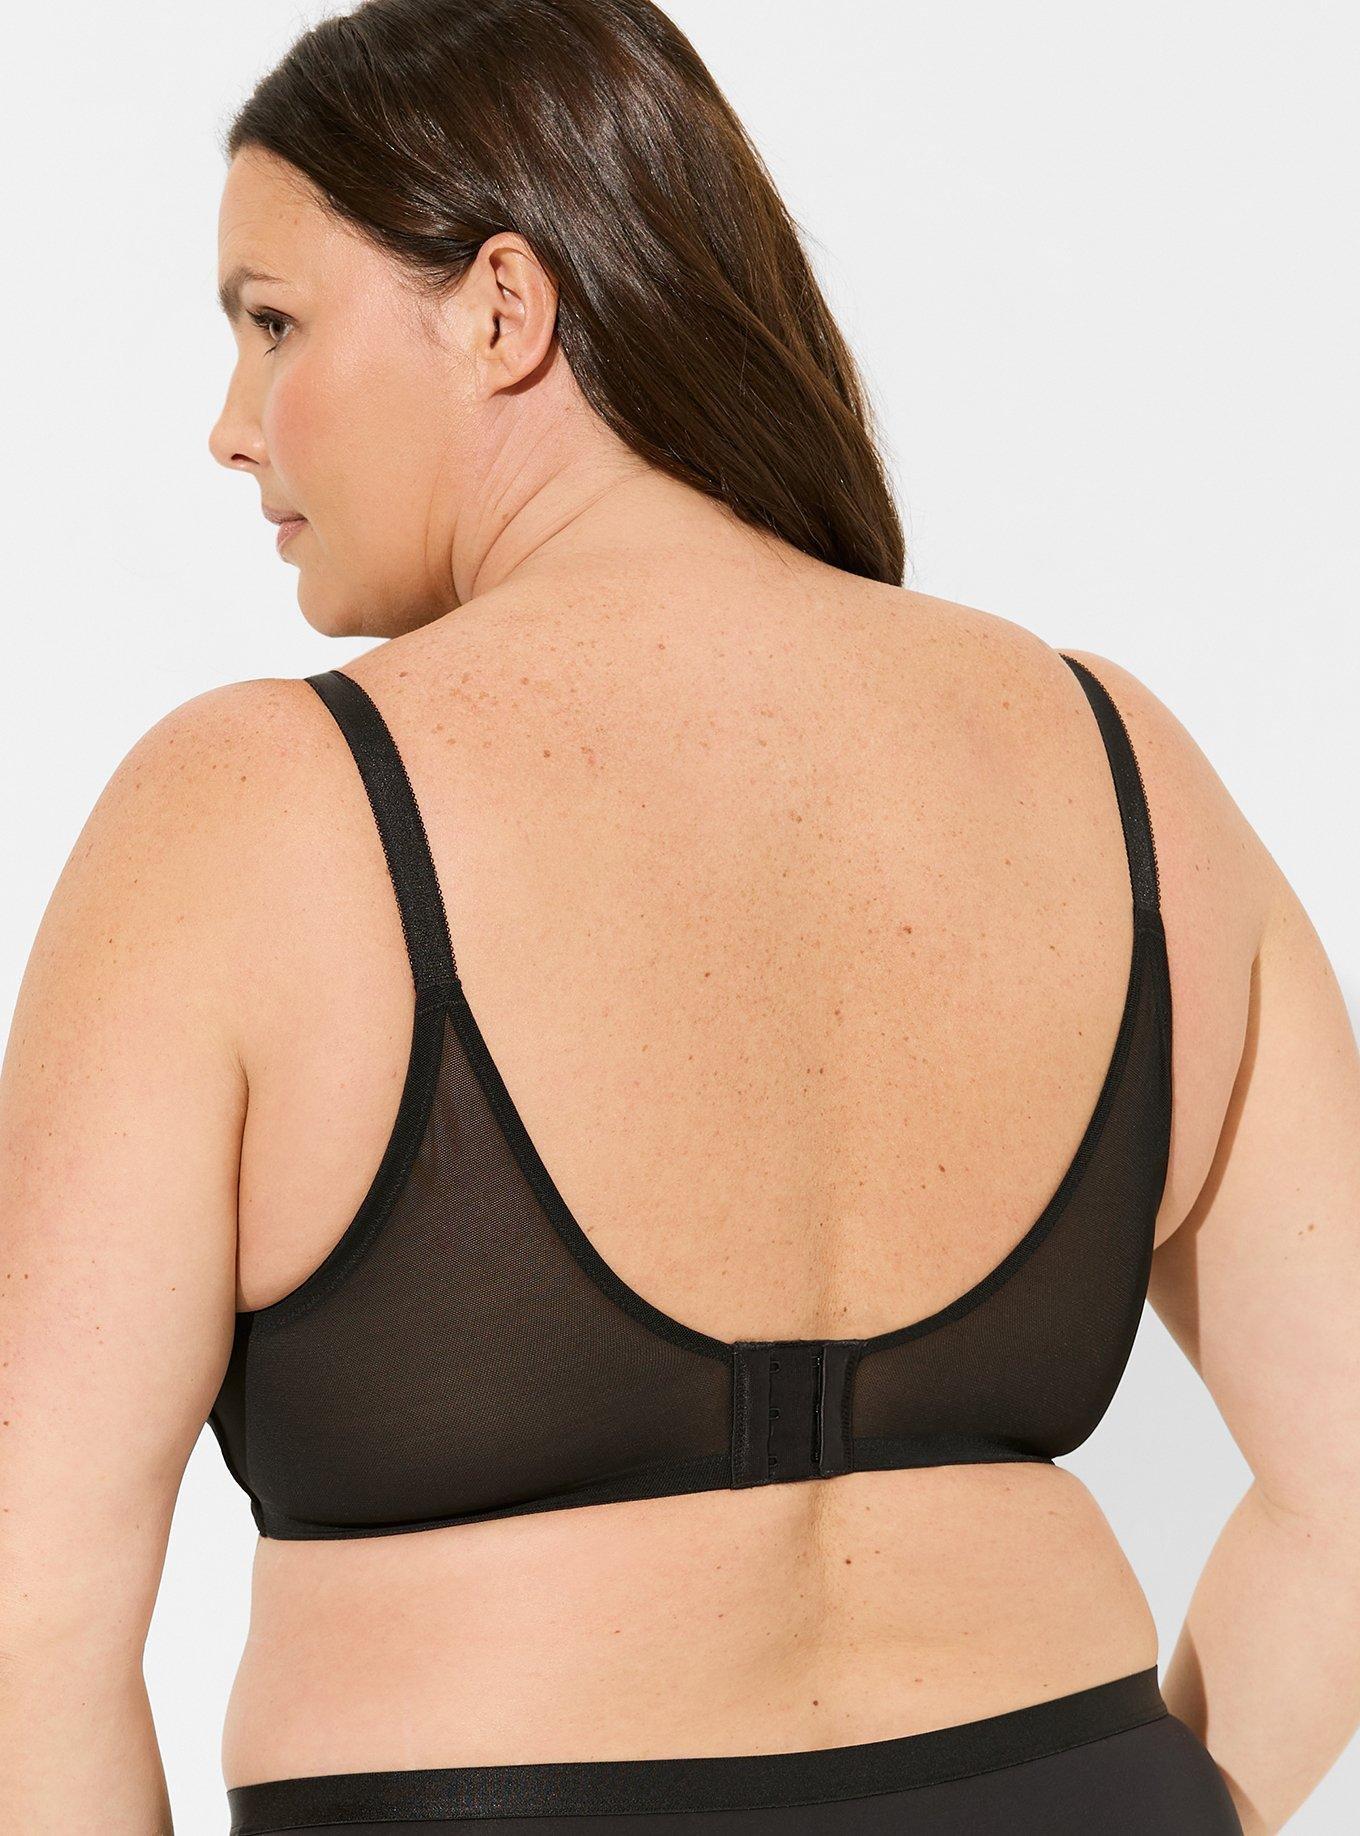 THE BEST BRAS FOR PLUS SIZE WOMEN! (NO BACK BULDGE & NO WIRES